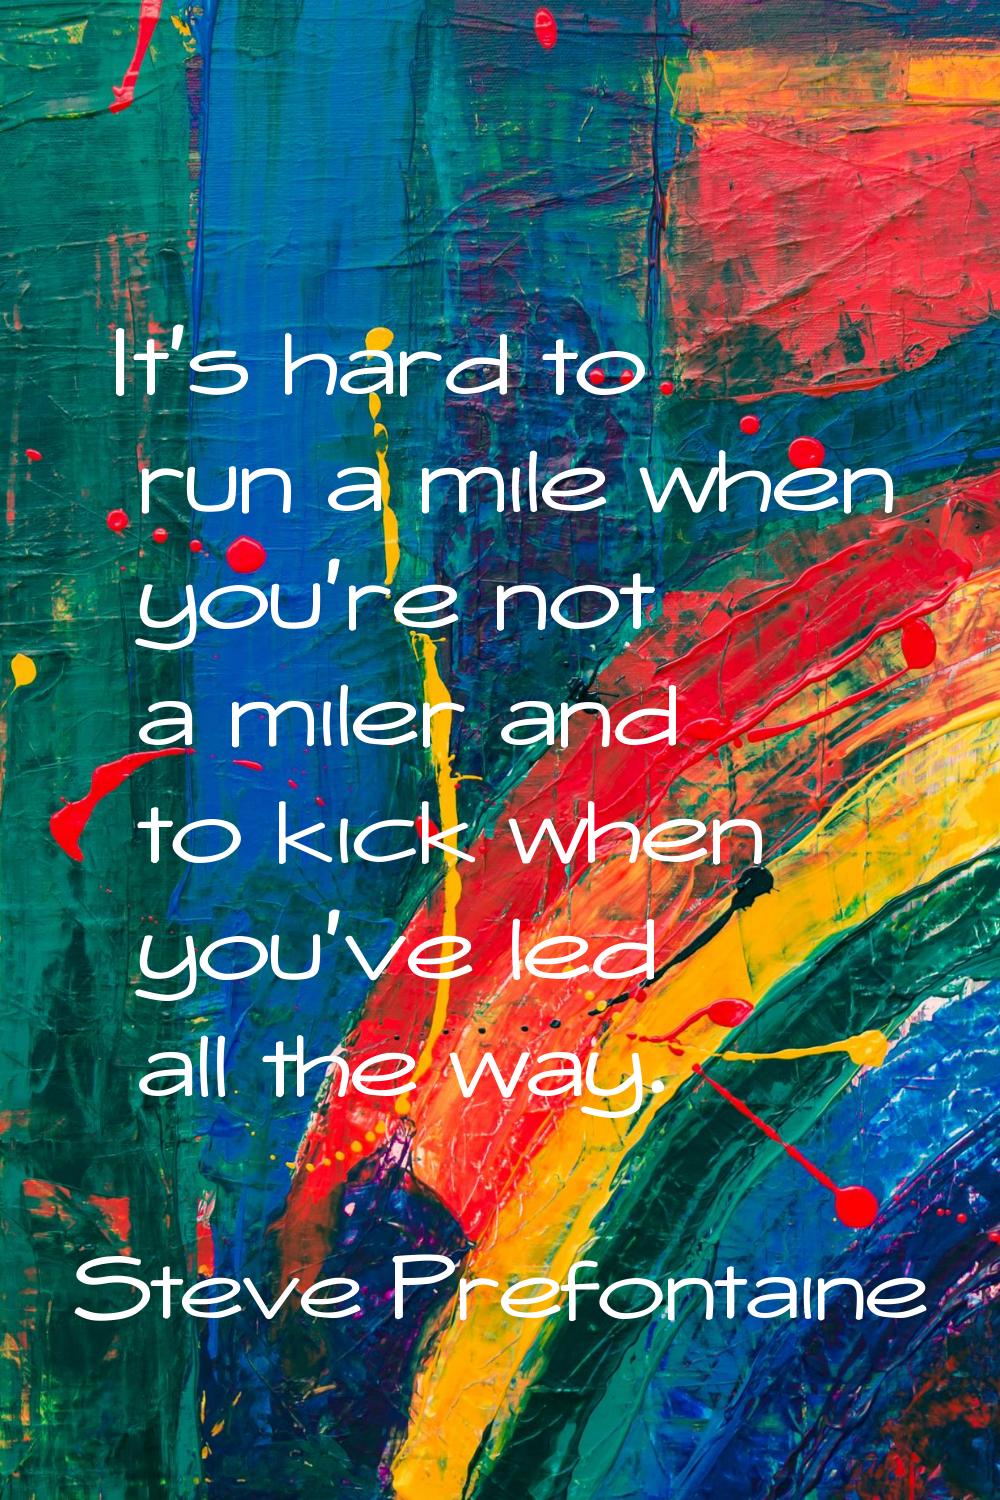 It's hard to run a mile when you're not a miler and to kick when you've led all the way.